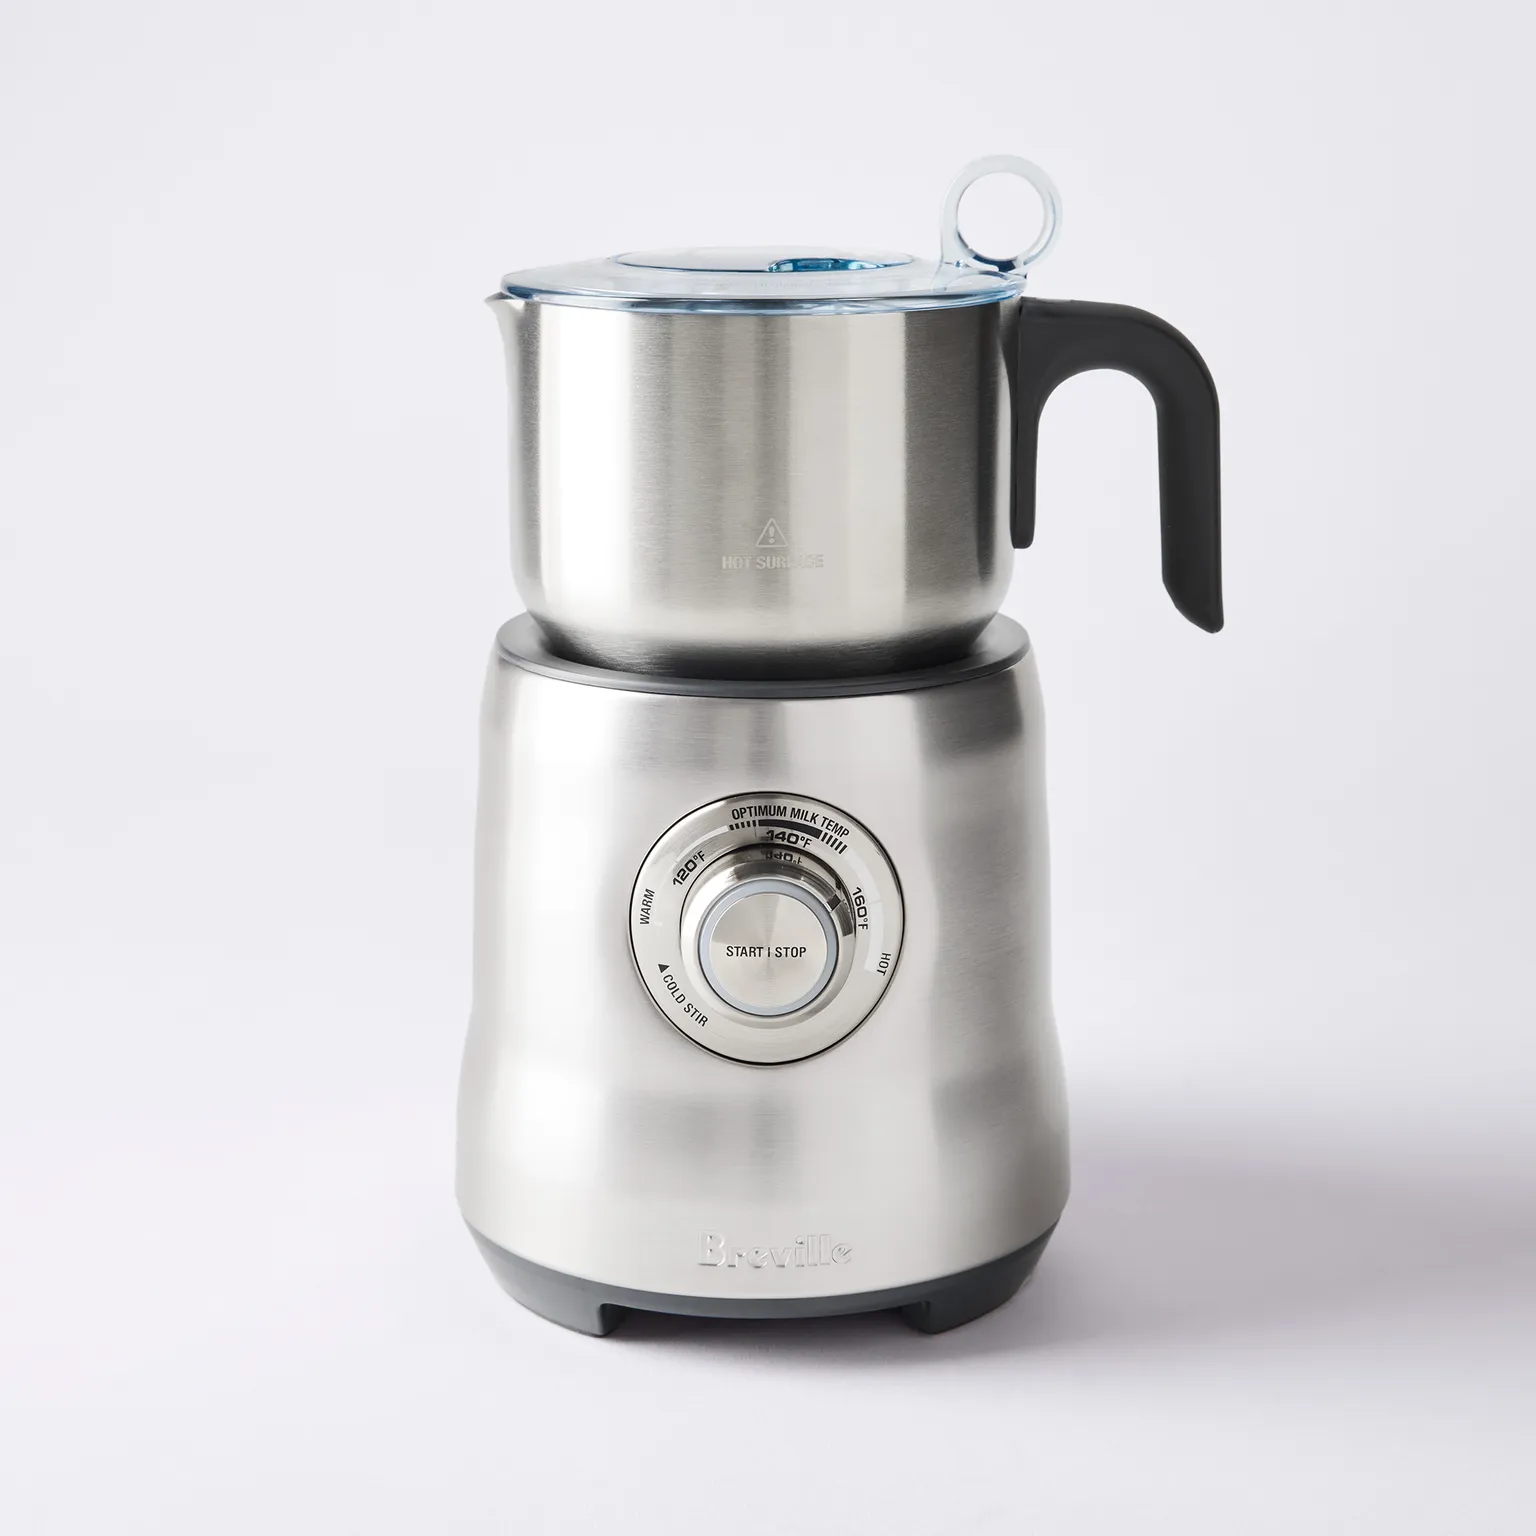 Breville Milk Frother - BMF600, Silver price in UAE,  UAE